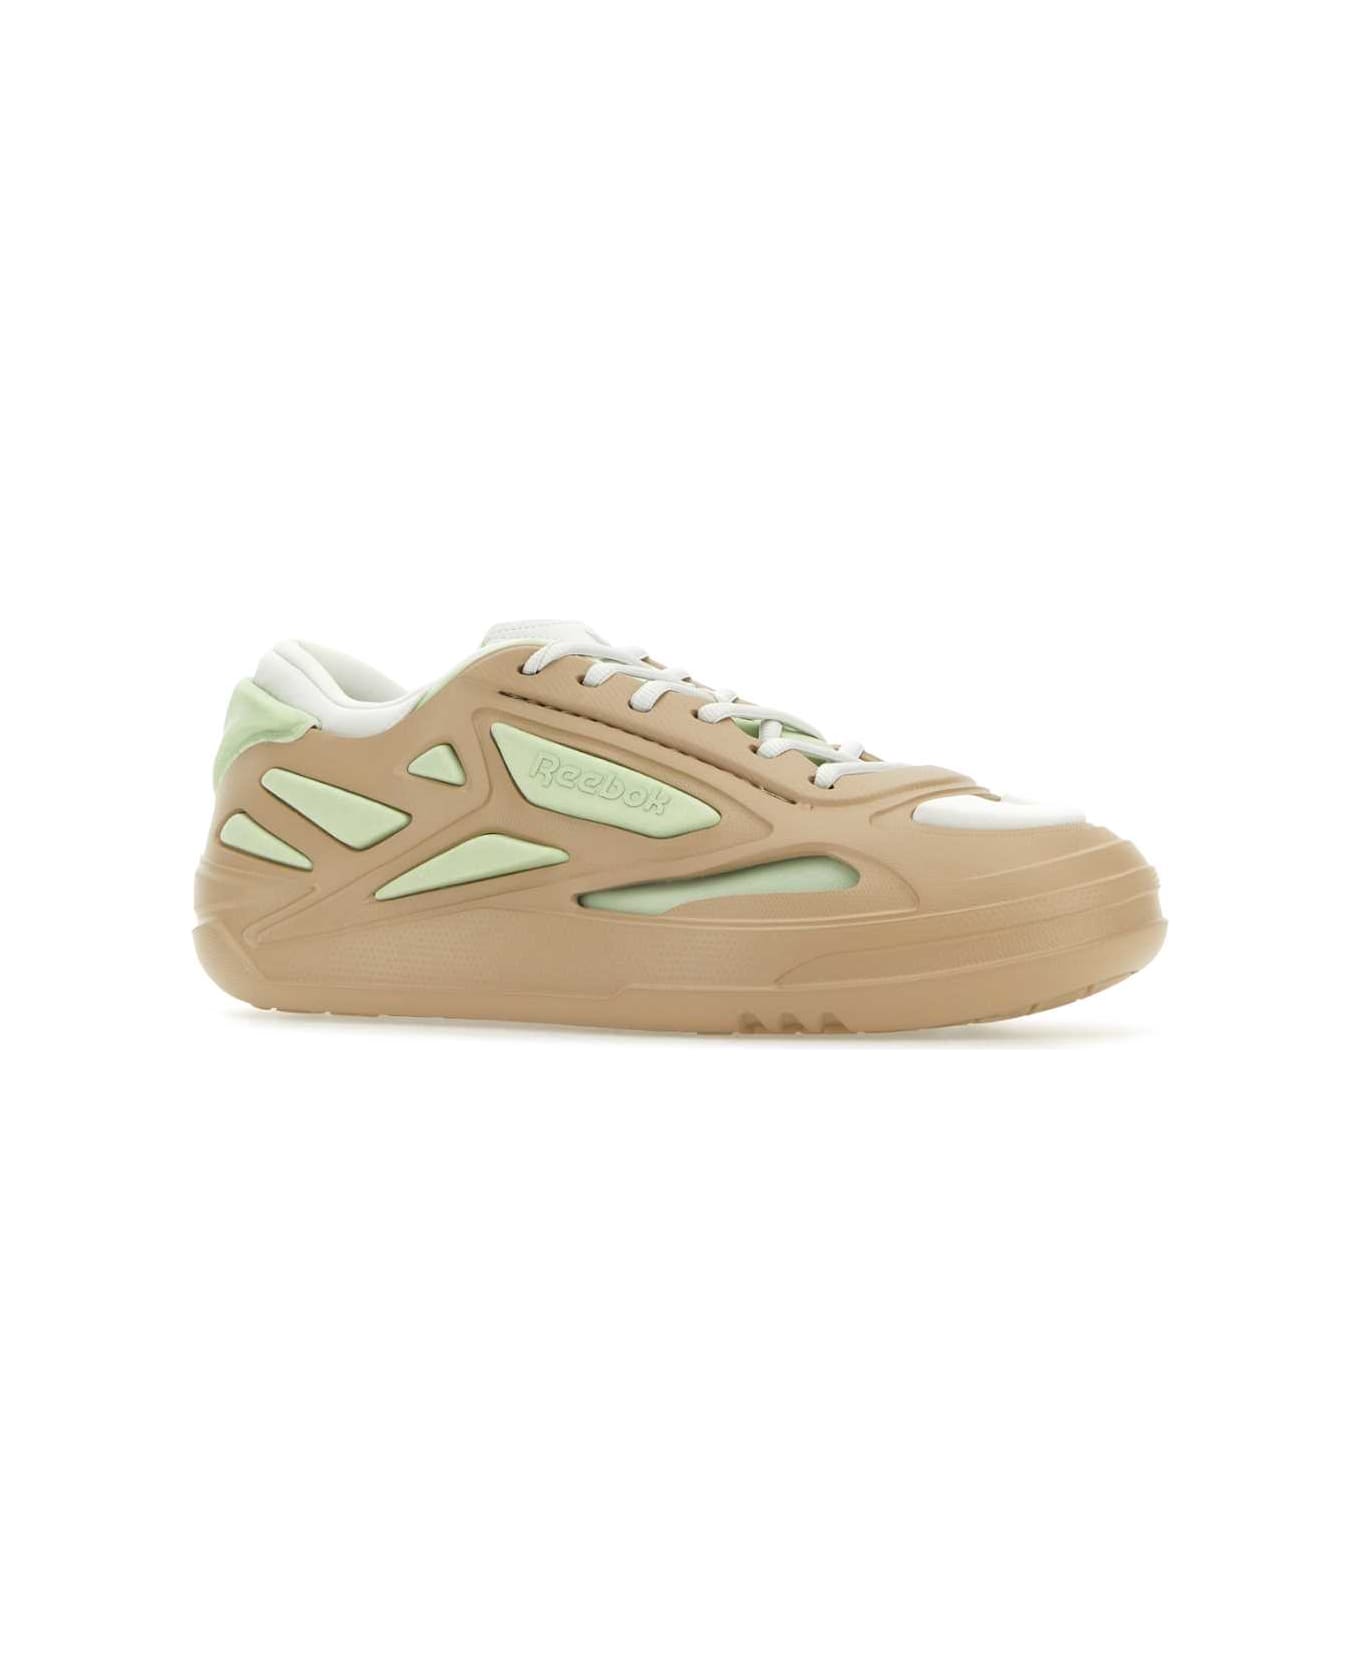 Reebok Multicolor Fabric And Rubber Future Club C Sneakers - BEIGELIG スニーカー